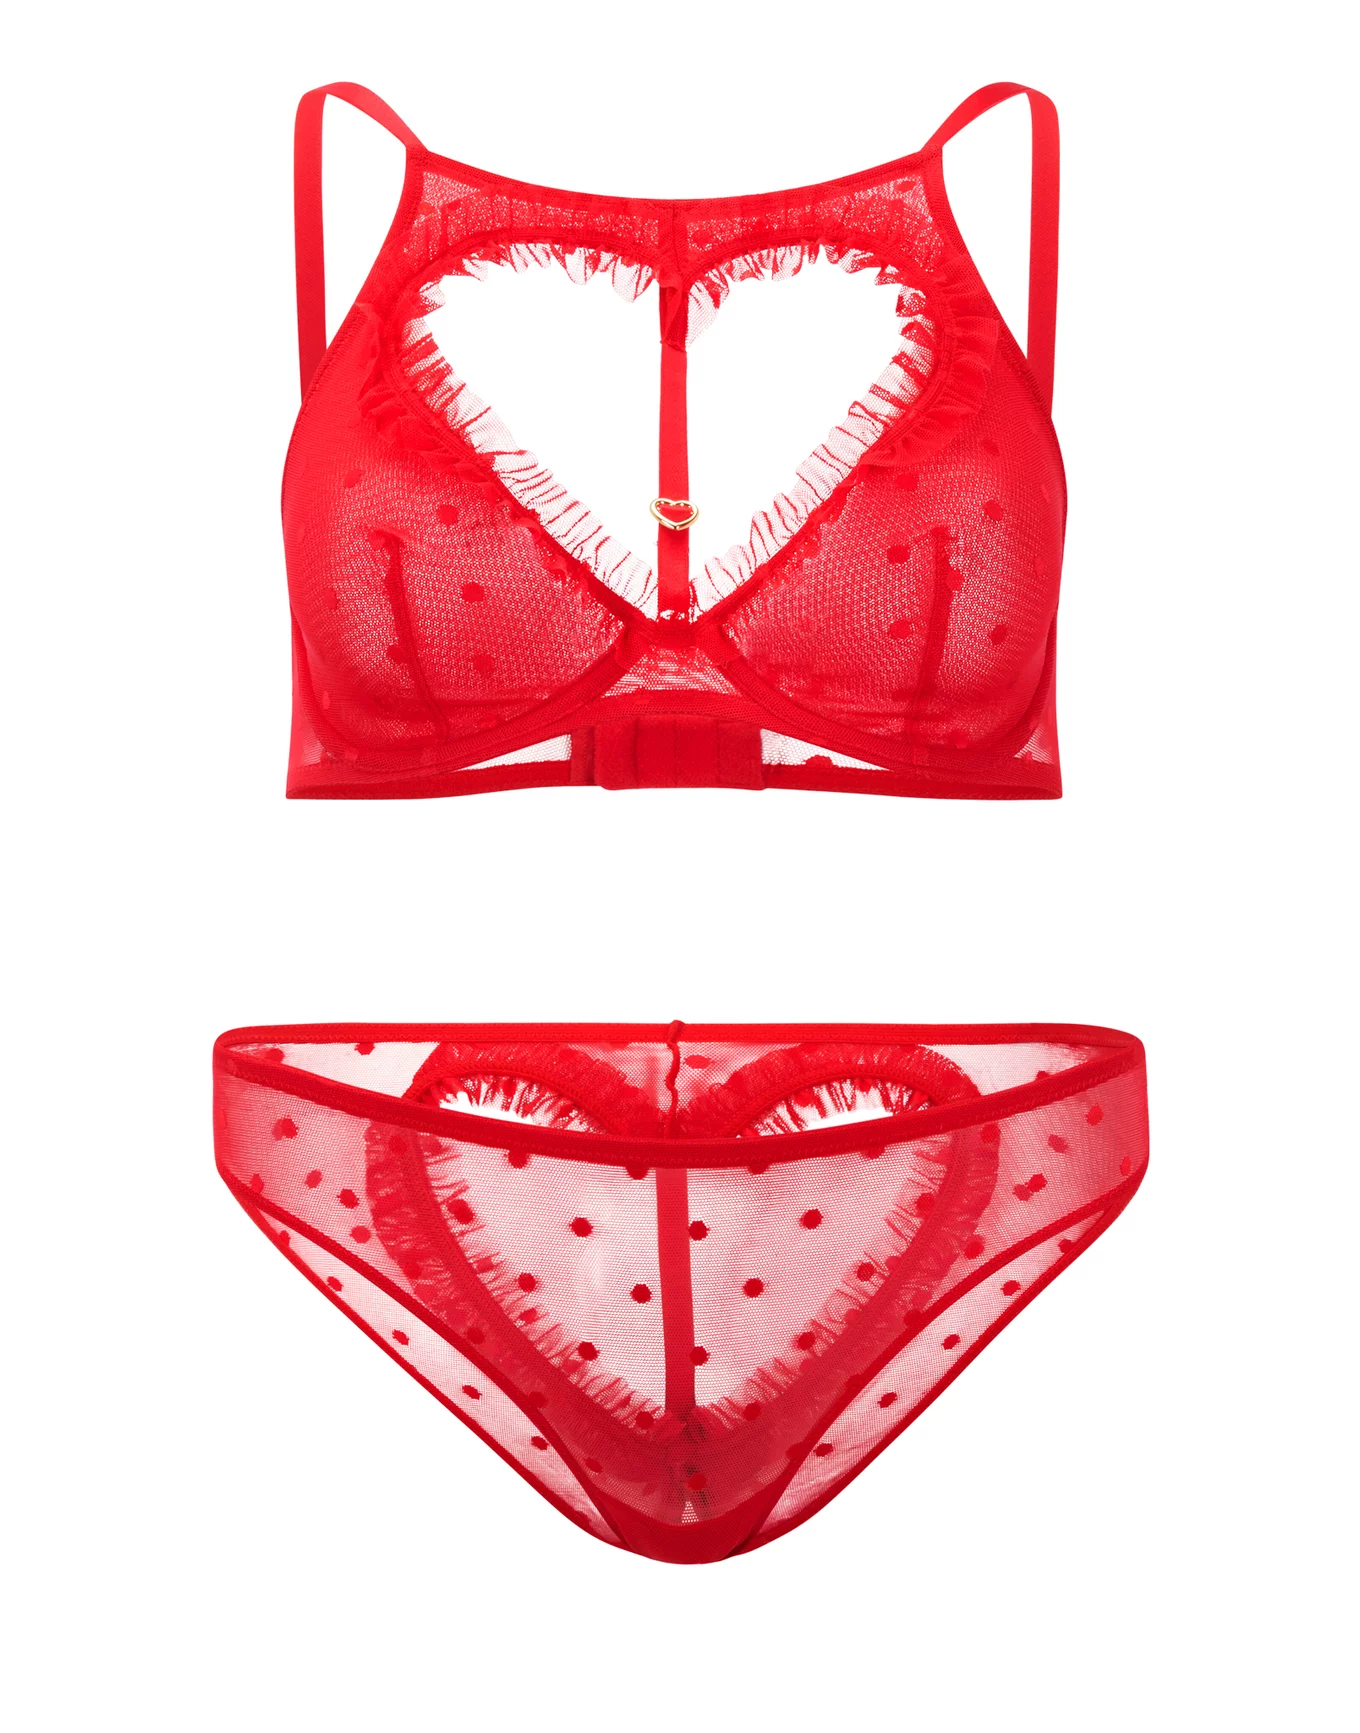 Ladies Red Underwear - A Bra And Panties Stock Photo, Picture and